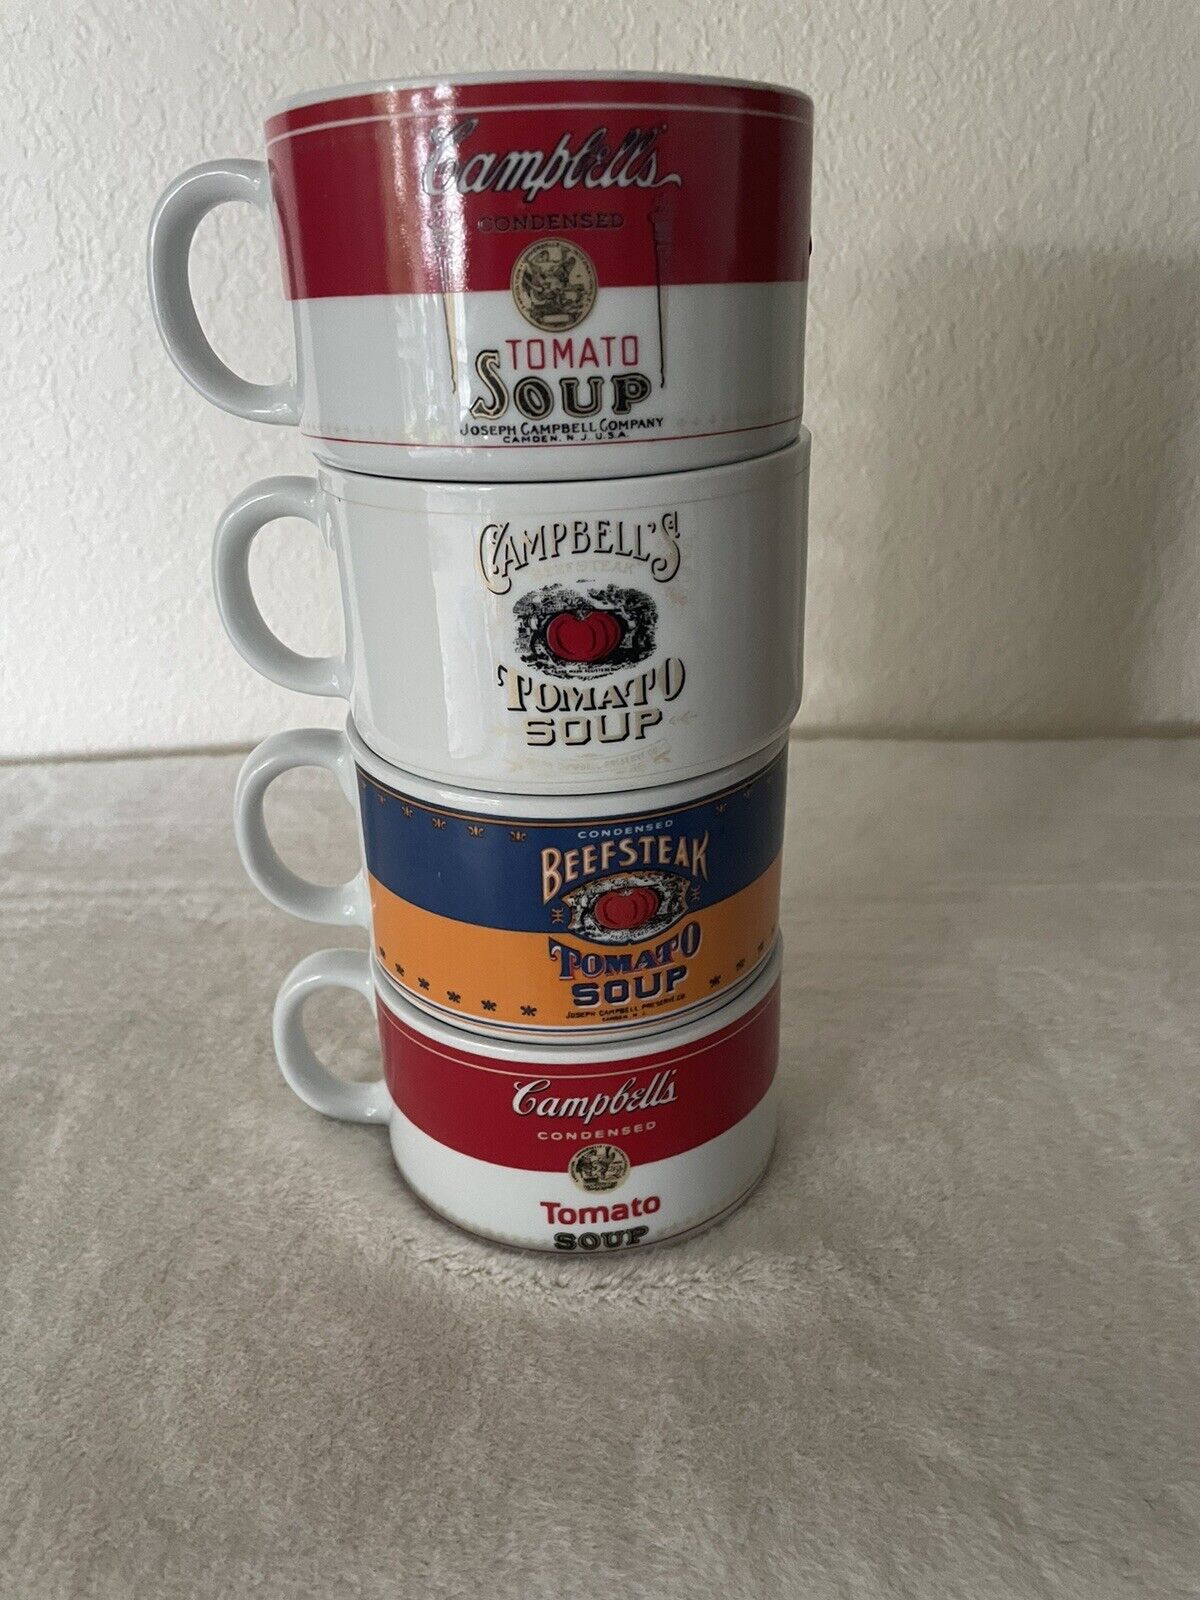 Cambell’s Soup Vintage Soup Mugs/Crocks With Handles Set Of 4